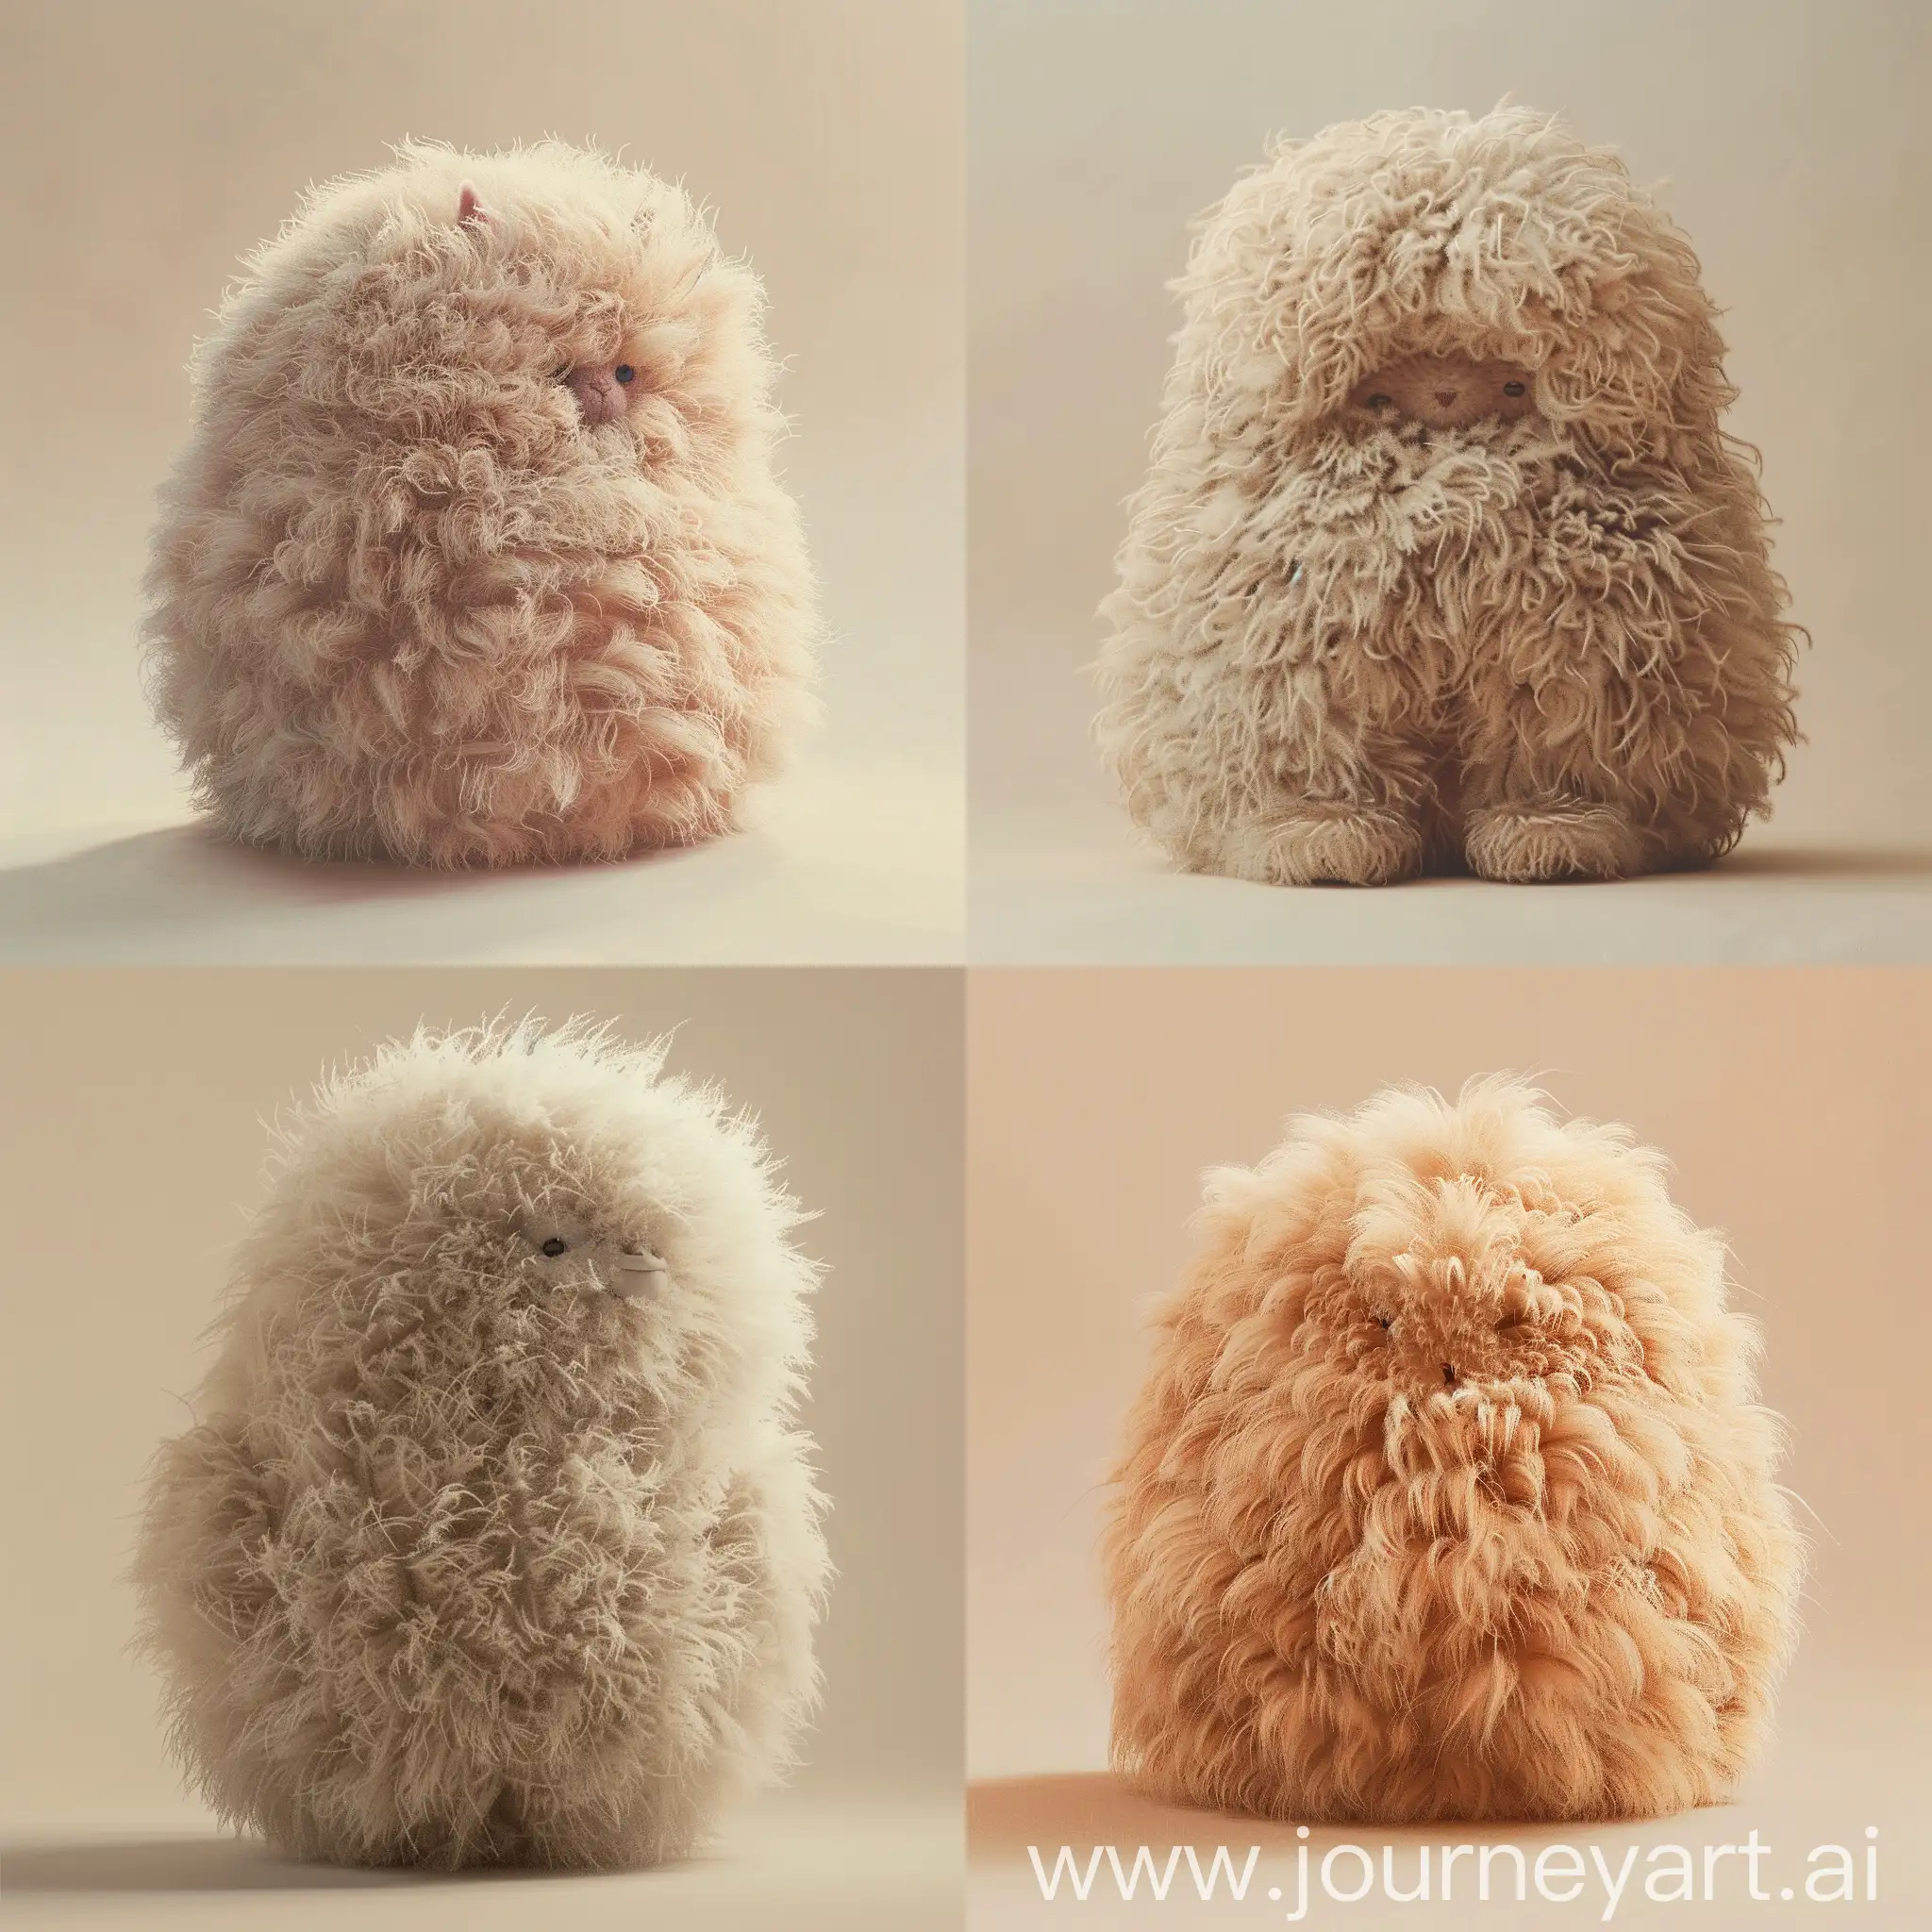 An adorable object is entirely covered in pile-high soft and fluffy fur. It looks incredibly endearing to the point of inciting 'aww'-like reactions. The background is a light, neutral shade to emphasize the object, and the lighting is gentle, creating a heartwarming and welcoming atmosphere.